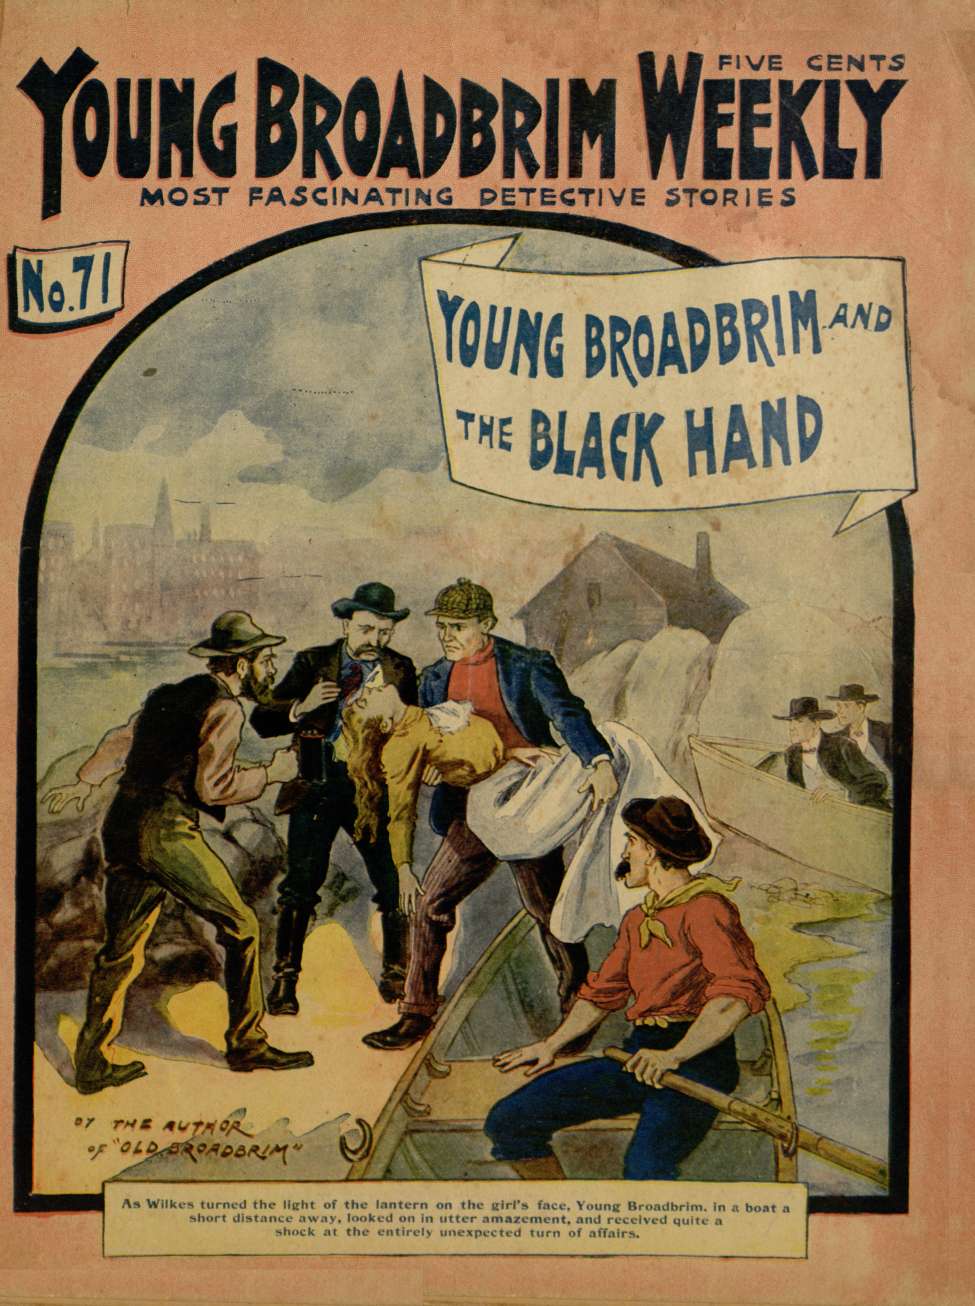 Book Cover For Young Broadbrim Weekly 71